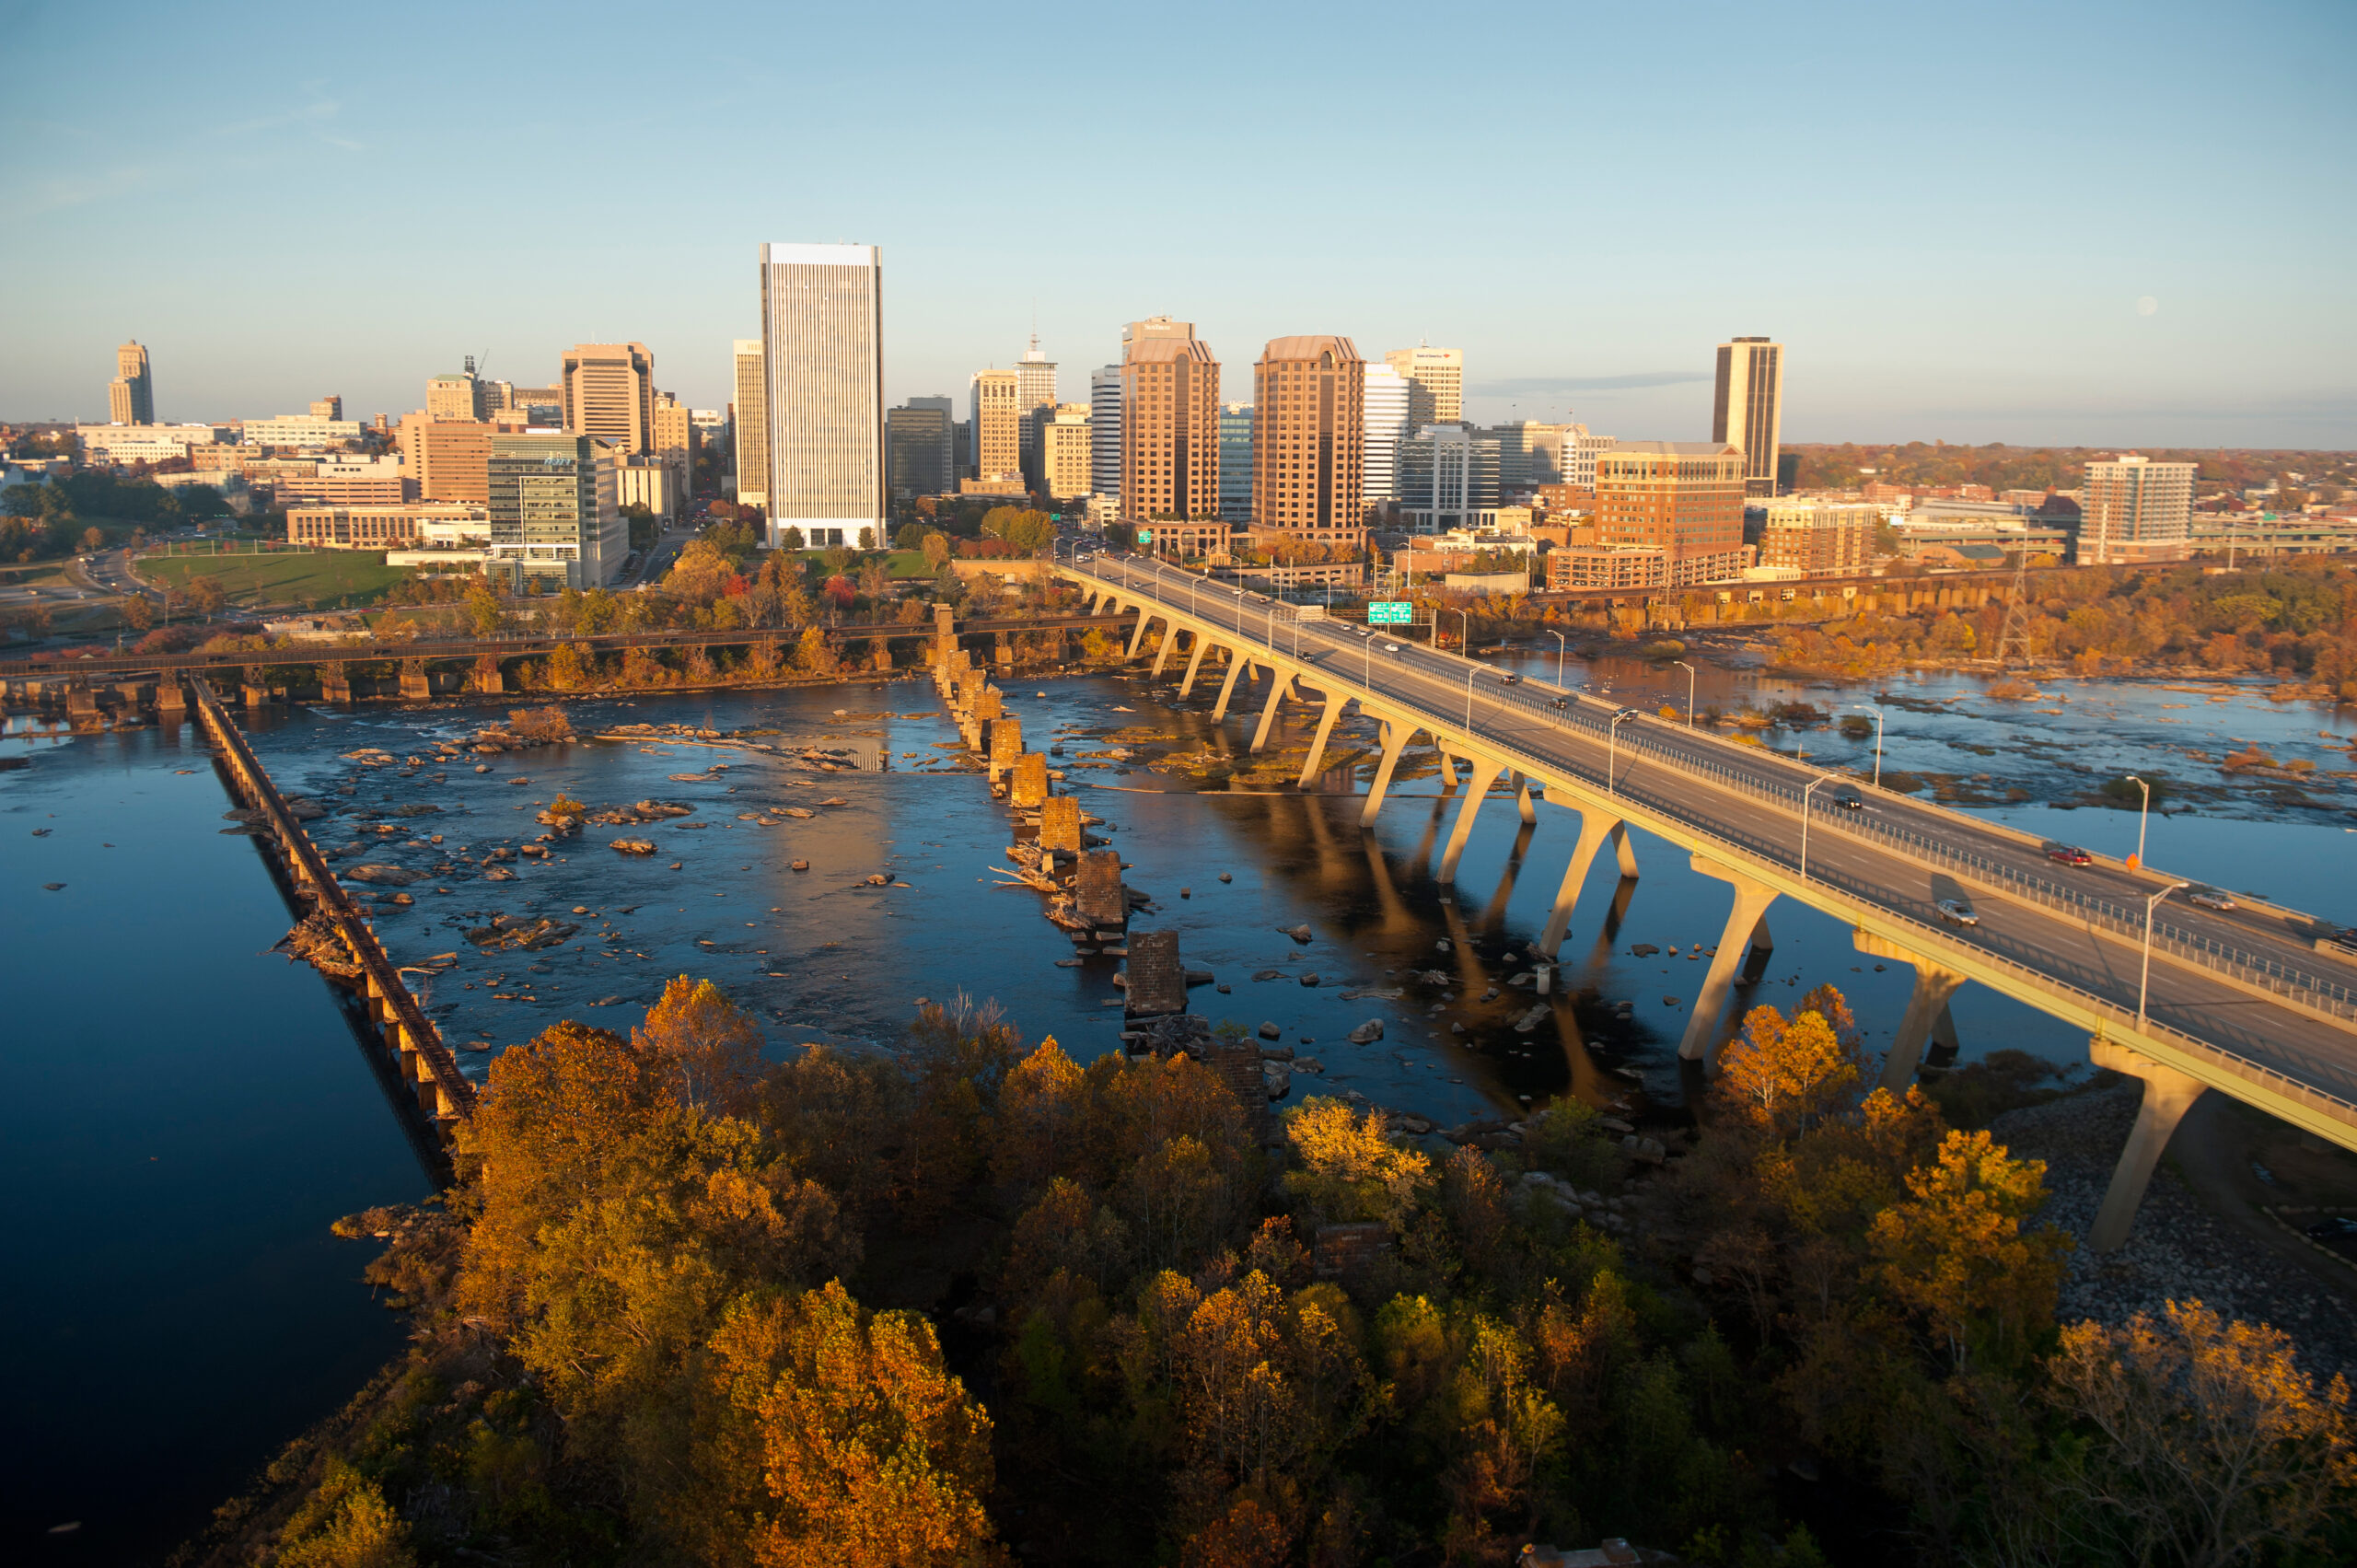 Image of a bridge crossing a river with a city skyline in the background.